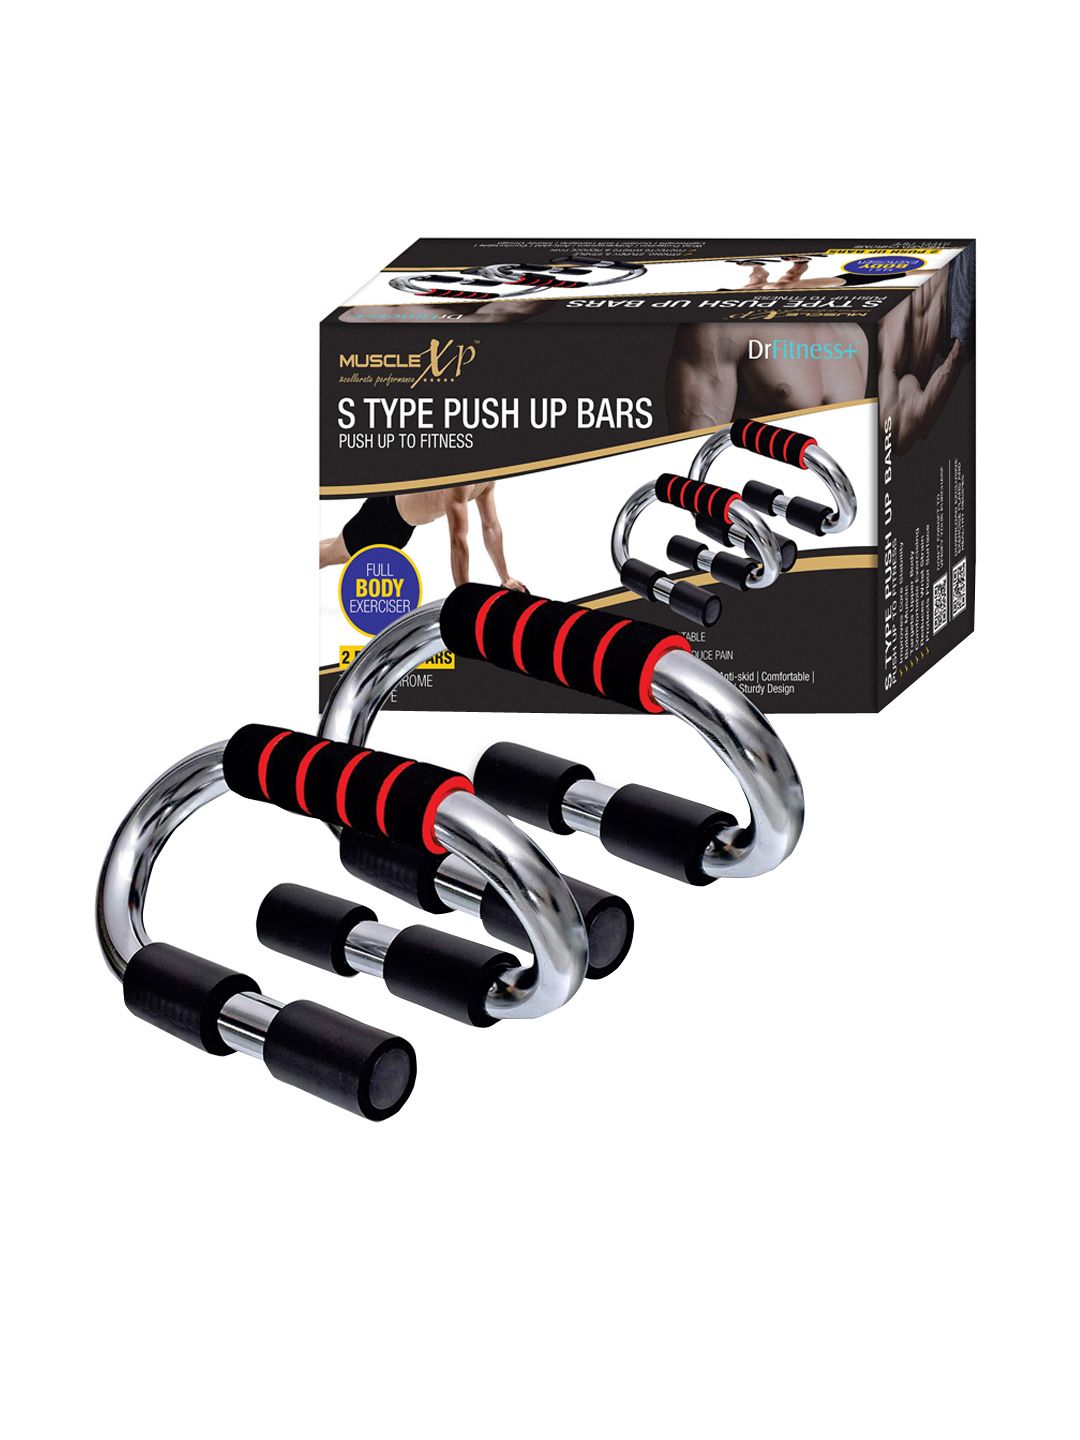 MUSCLEXP Set Of 2 S Type Push Up Bars Price in India